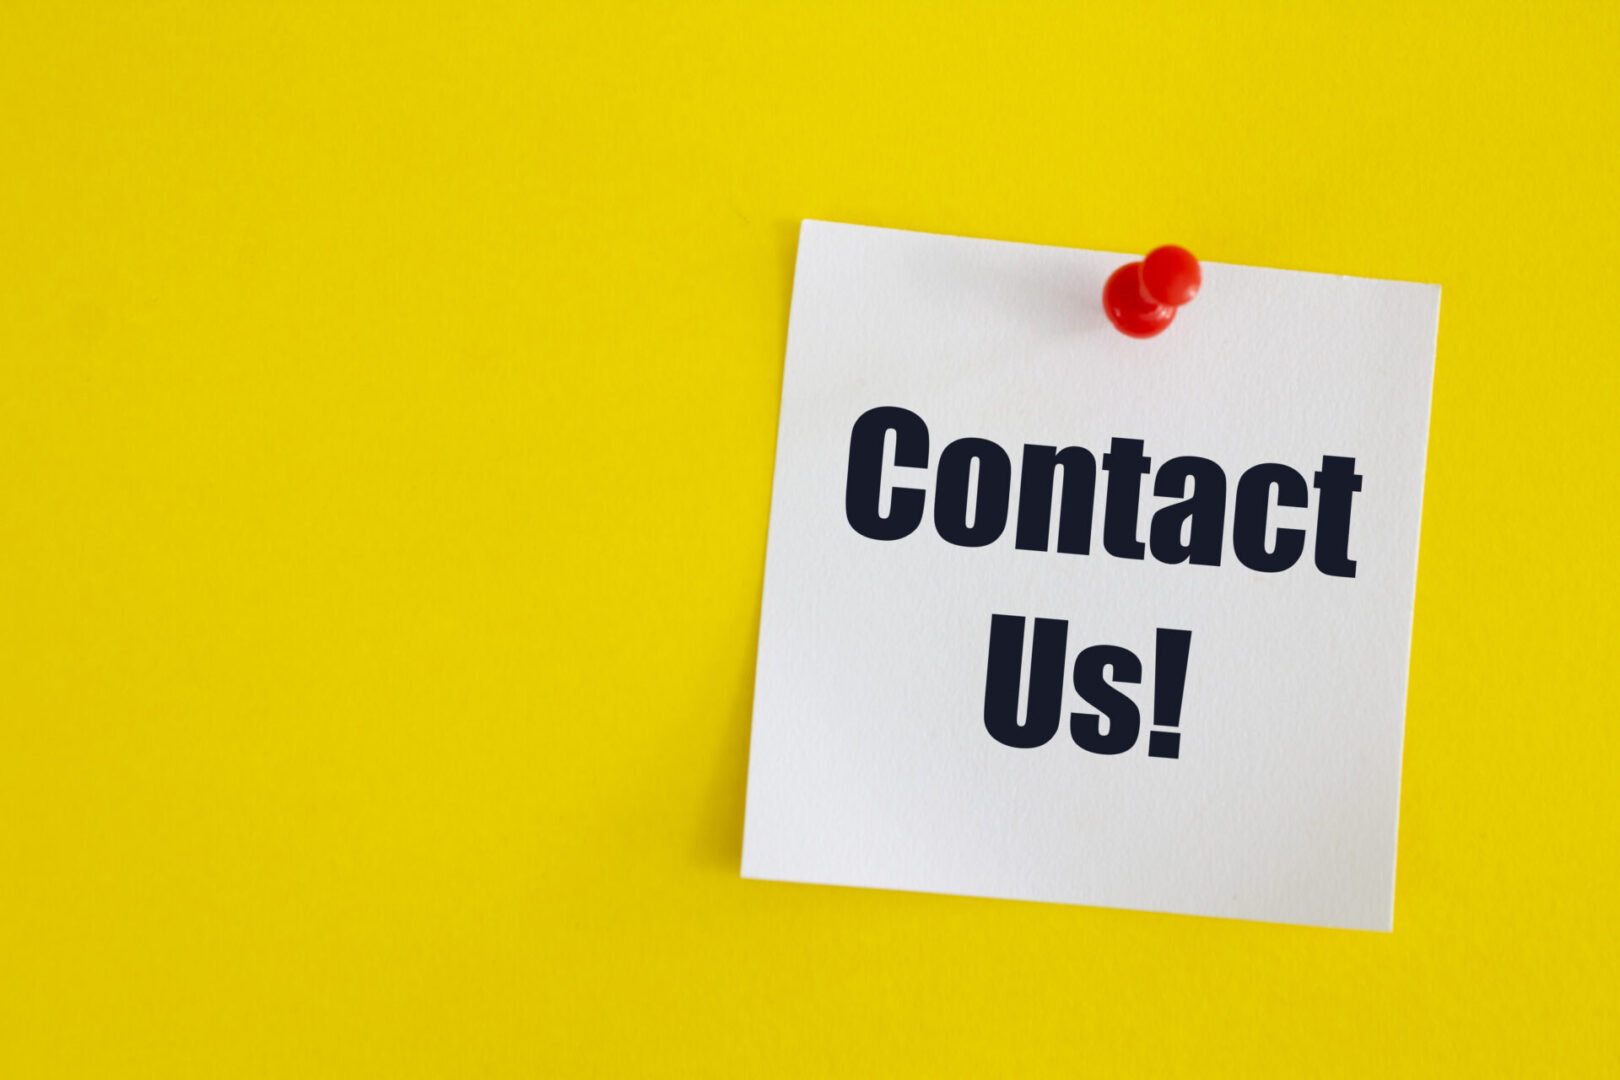 Contact us, written on an adhesive note on a yellow background.